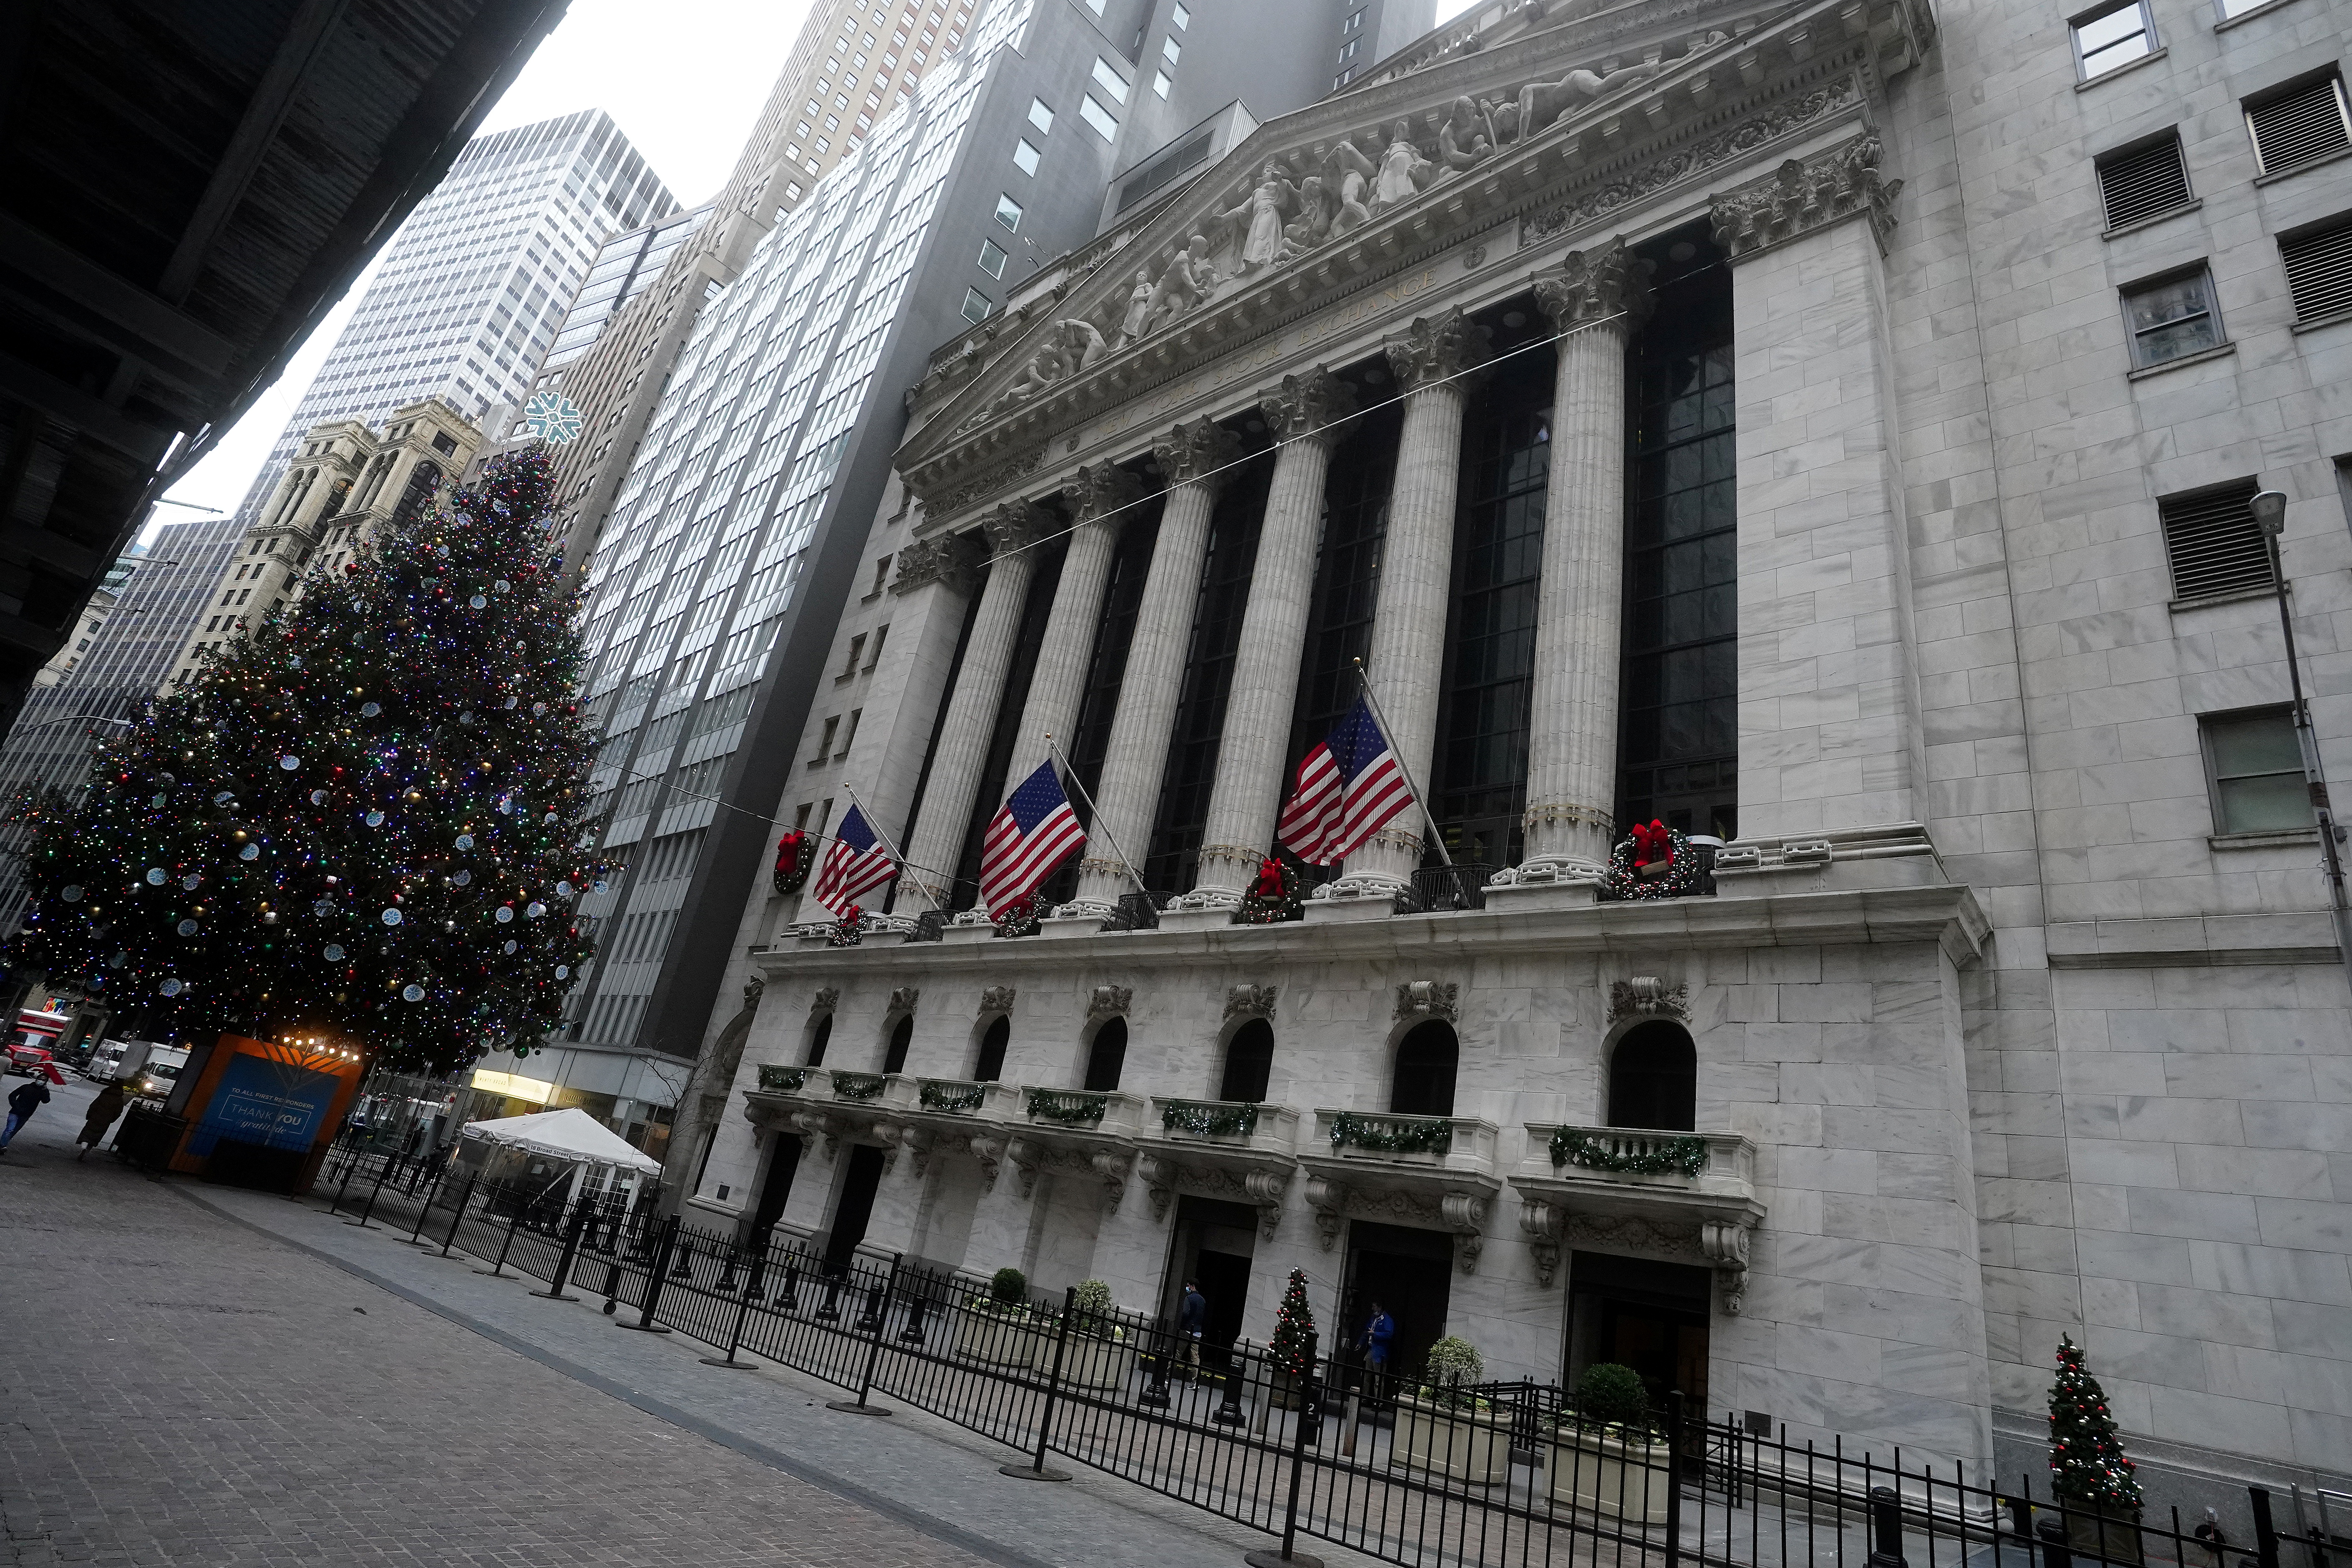 A Christmas tree is pictured outside the New York Stock Exchange